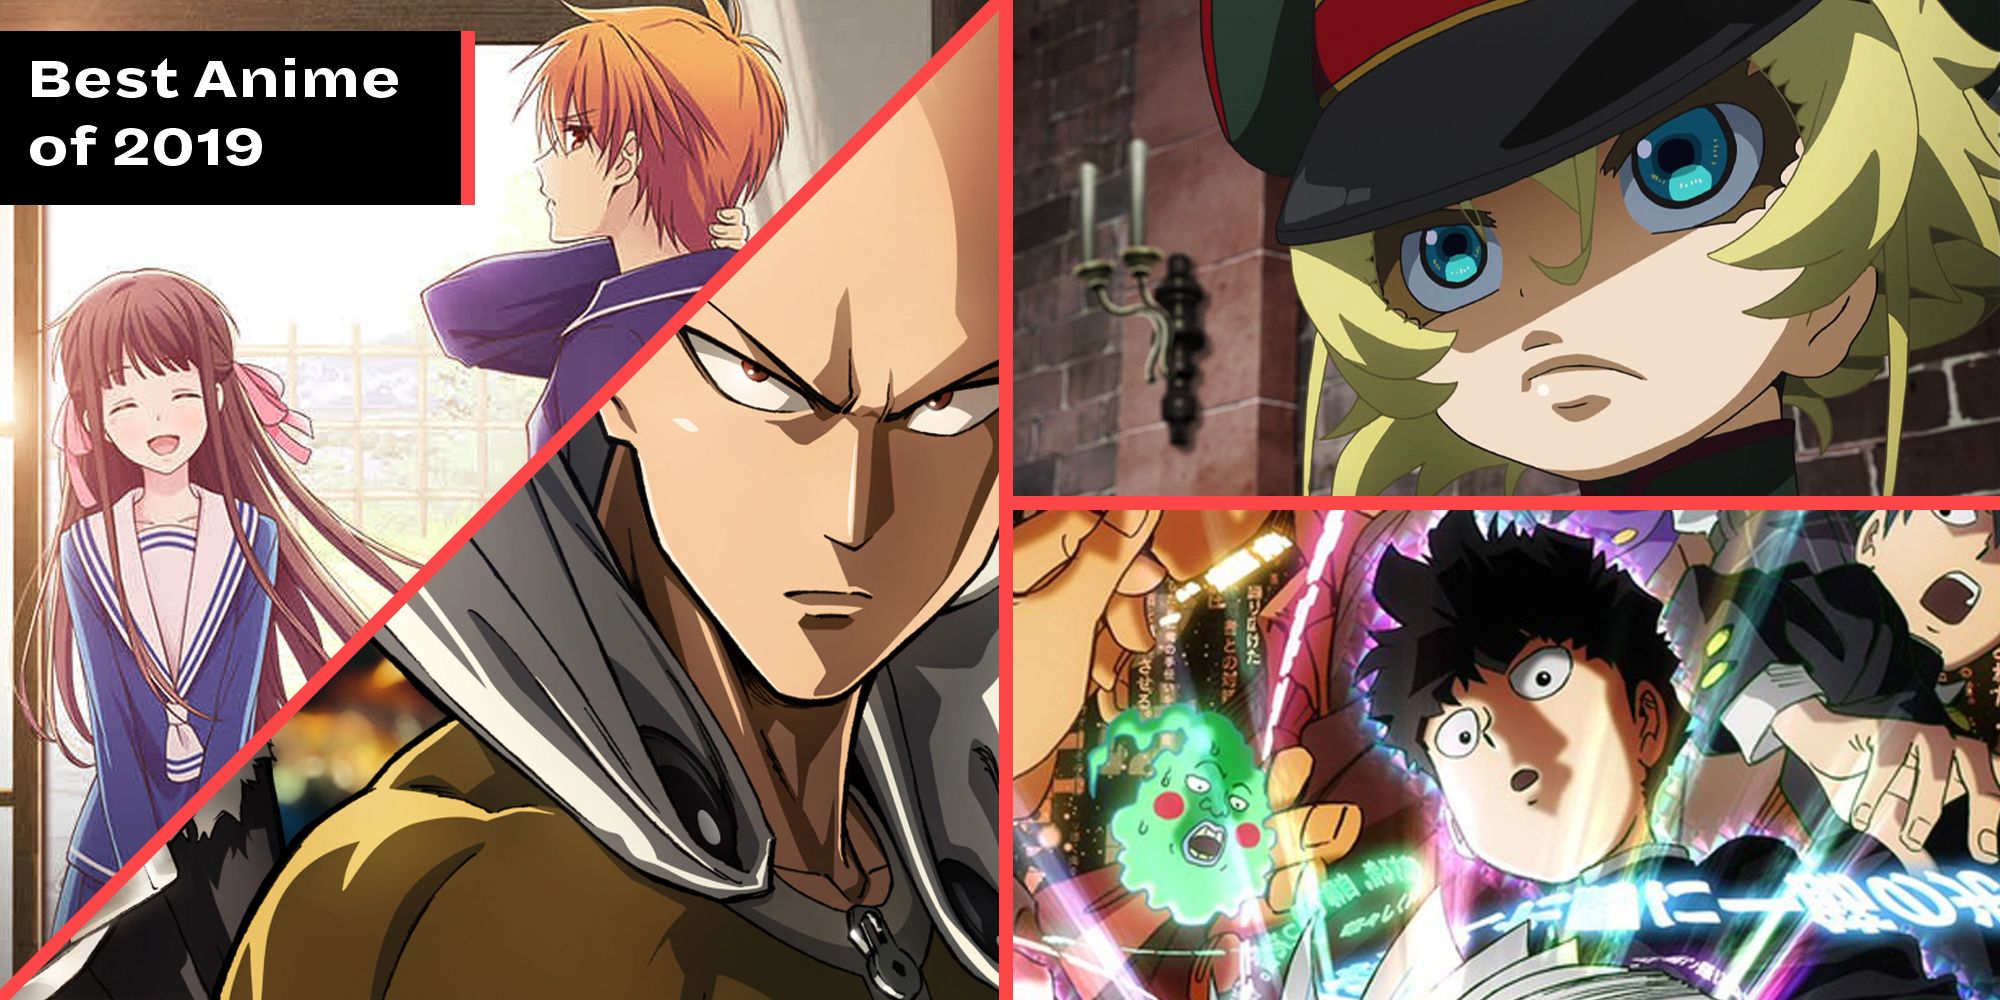 The Best Anime Of 2019 Top 10 New Anime Movies And Series